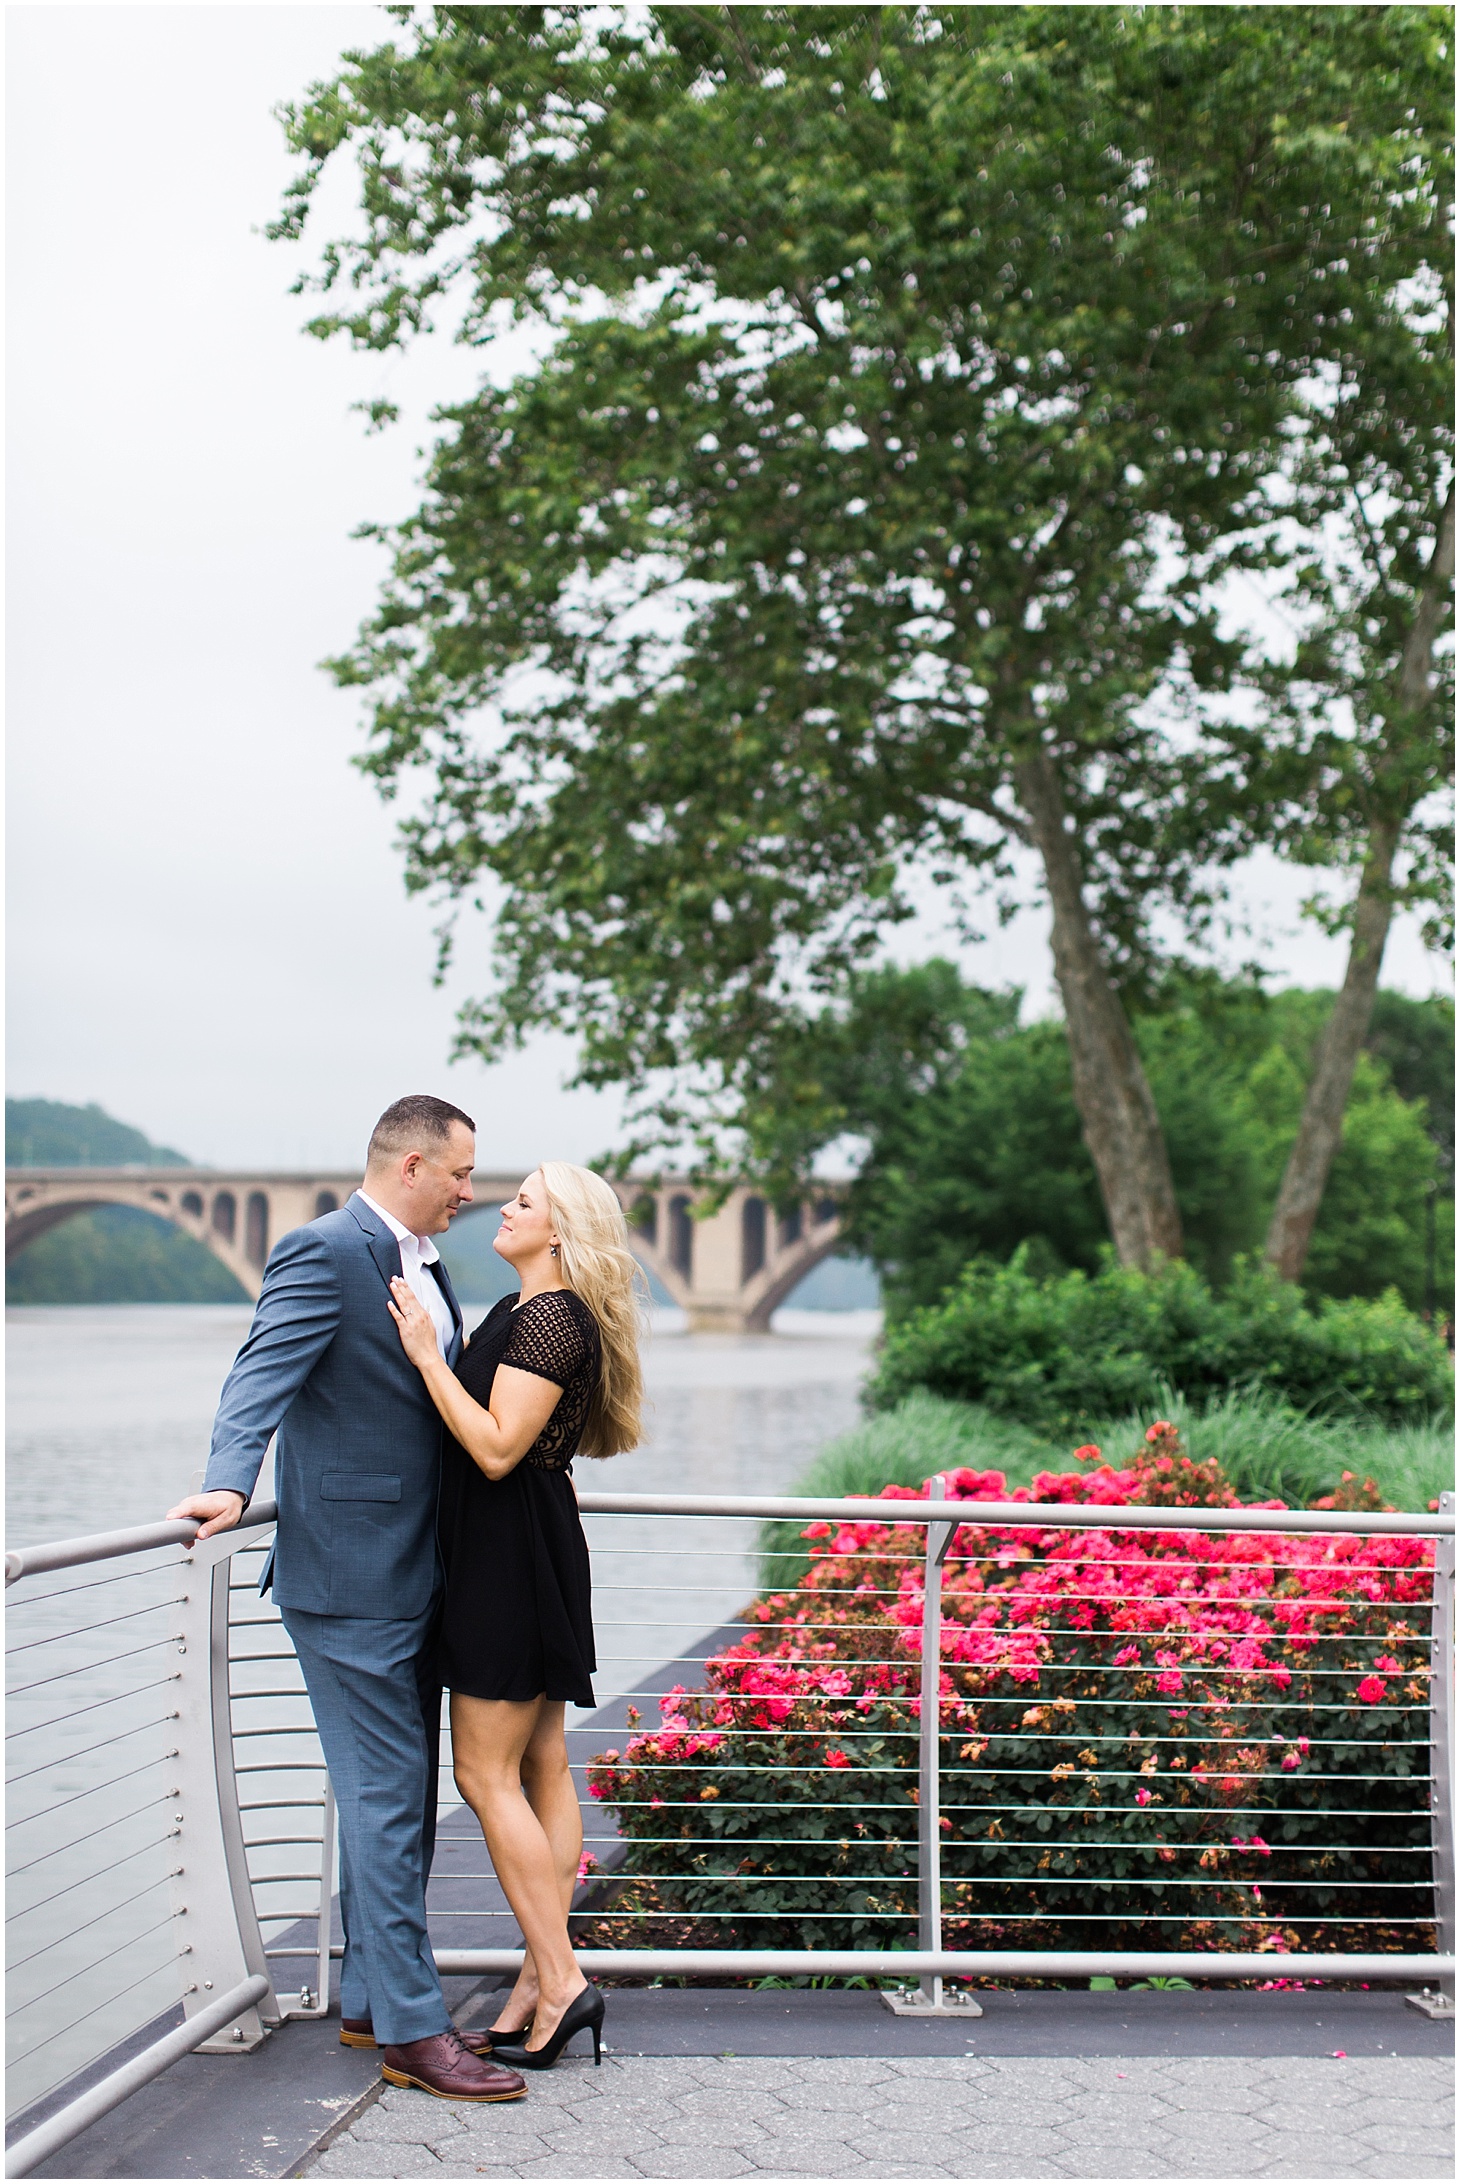 romantic-engagement-shoot-around-the-beautiful-d-c-monuments-by-sarah-bradshaw-photography_0021